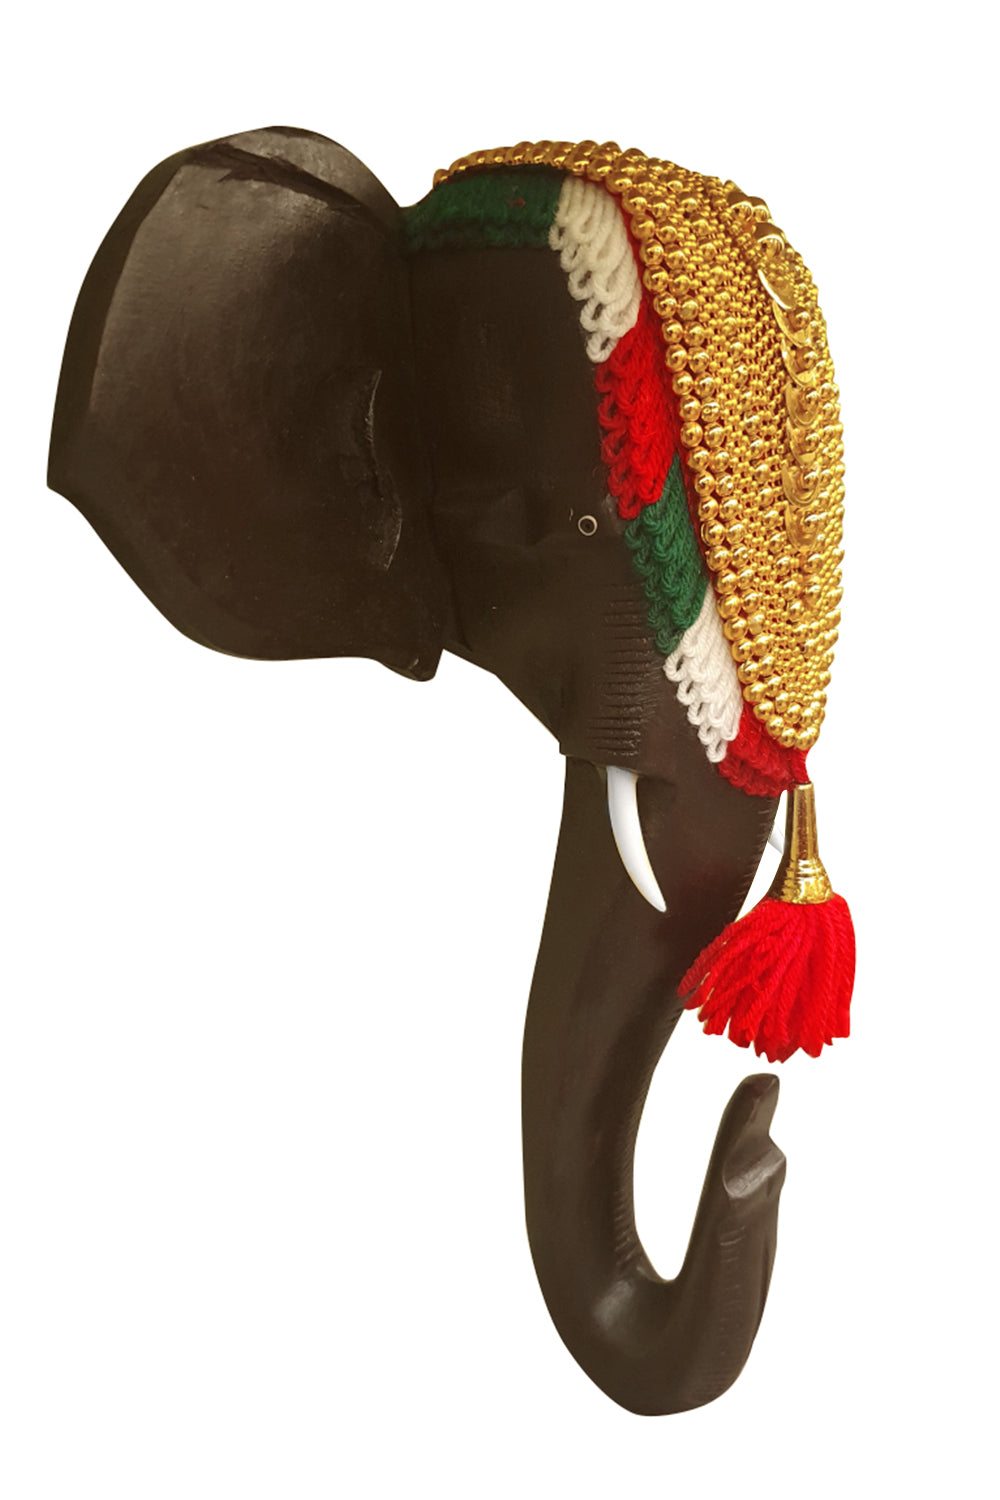 Southloom Handmade Temple Elephant Head Handicraft (Carved from Mahogany Wood) 10 Inches